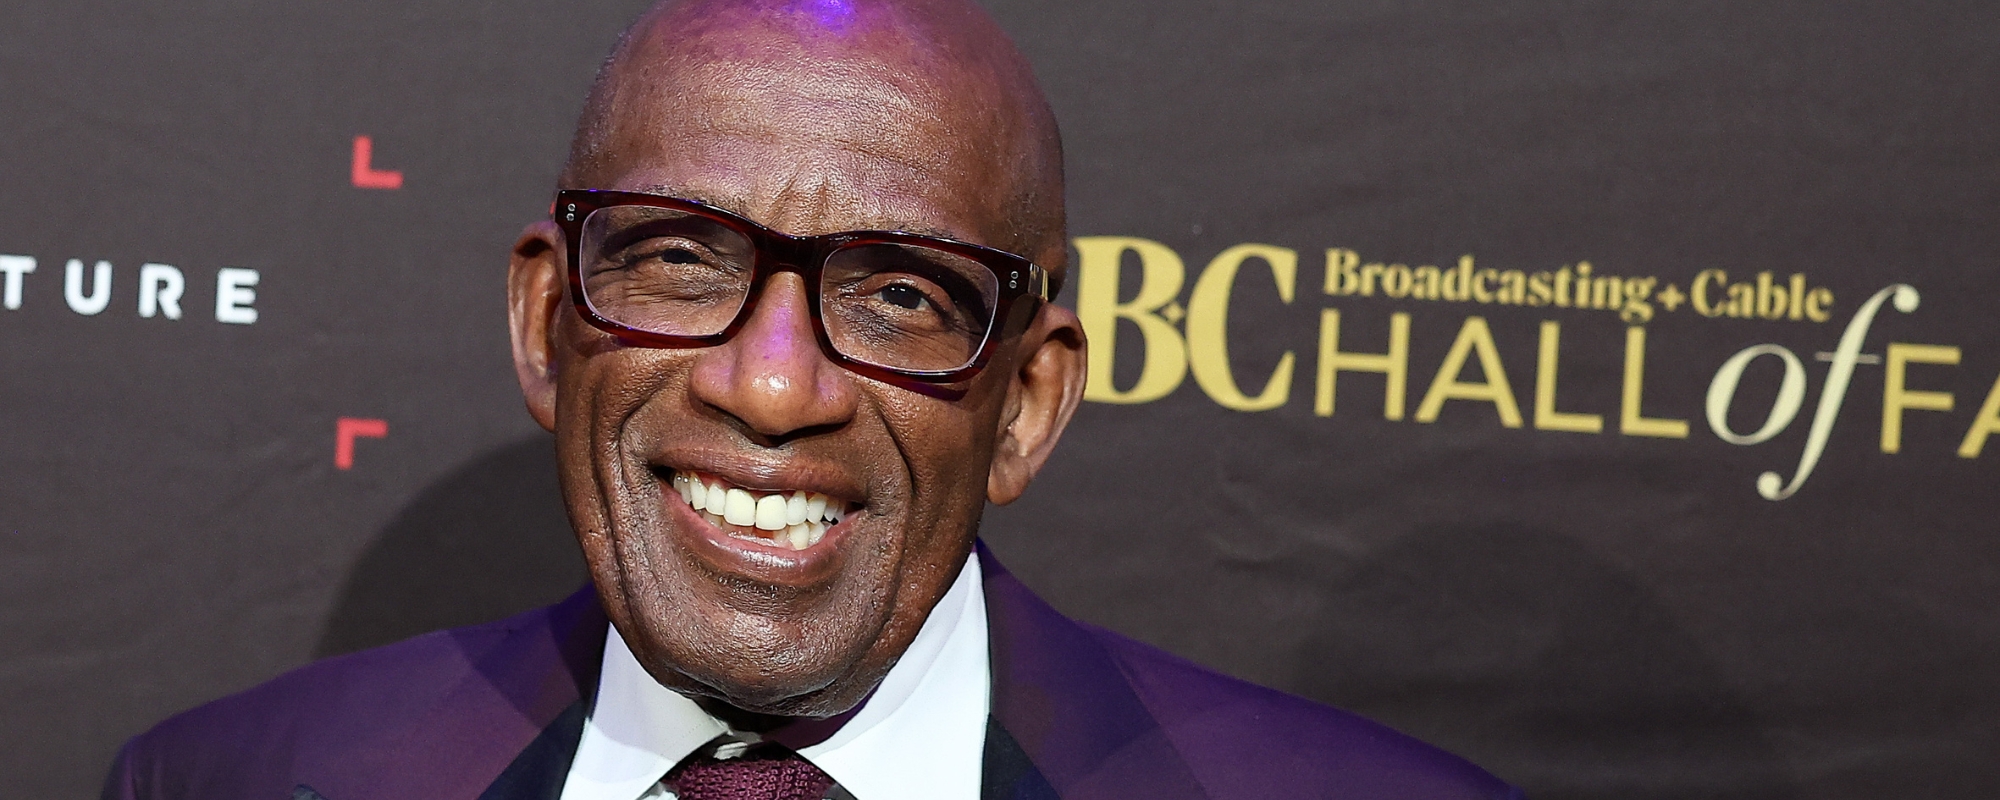 Fans React to Al Roker’s Return to Hosting the Macy’s Thanksgiving Day Parade